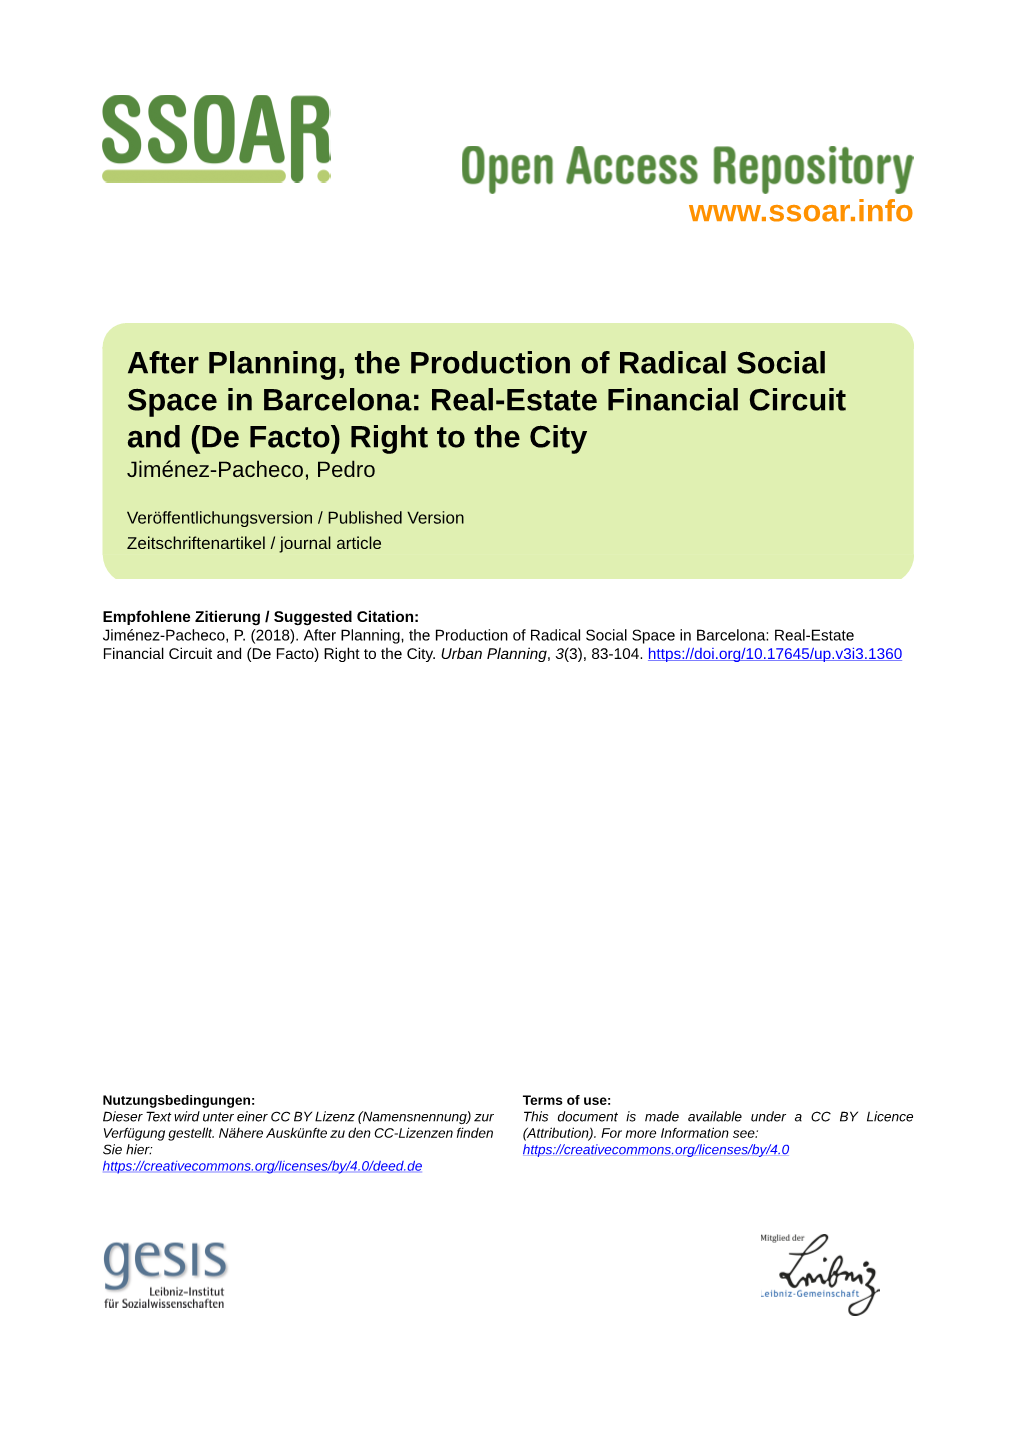 After Planning, the Production of Radical Social Space in Barcelona: Real-Estate Financial Circuit and (De Facto) Right to the City Jiménez-Pacheco, Pedro